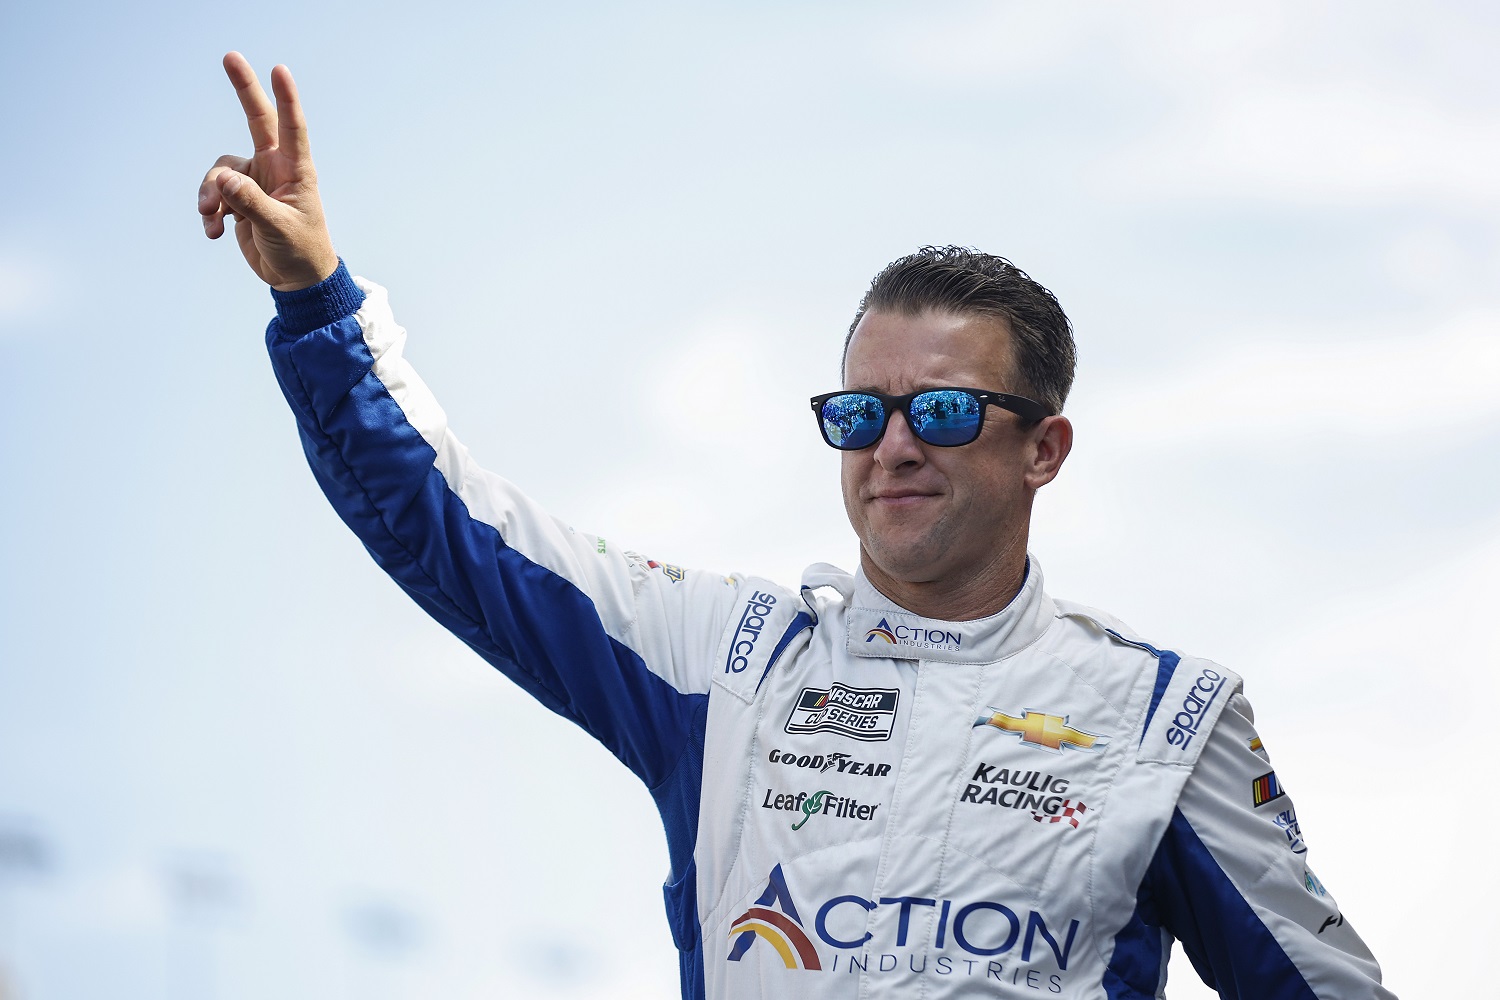 AJ Allmendinger waves to fans as he walks onstage during driver intros for the NASCAR Cup Series South Point 400 at Las Vegas Motor Speedway on Oct. 16, 2022. | Sean Gardner/Getty Images